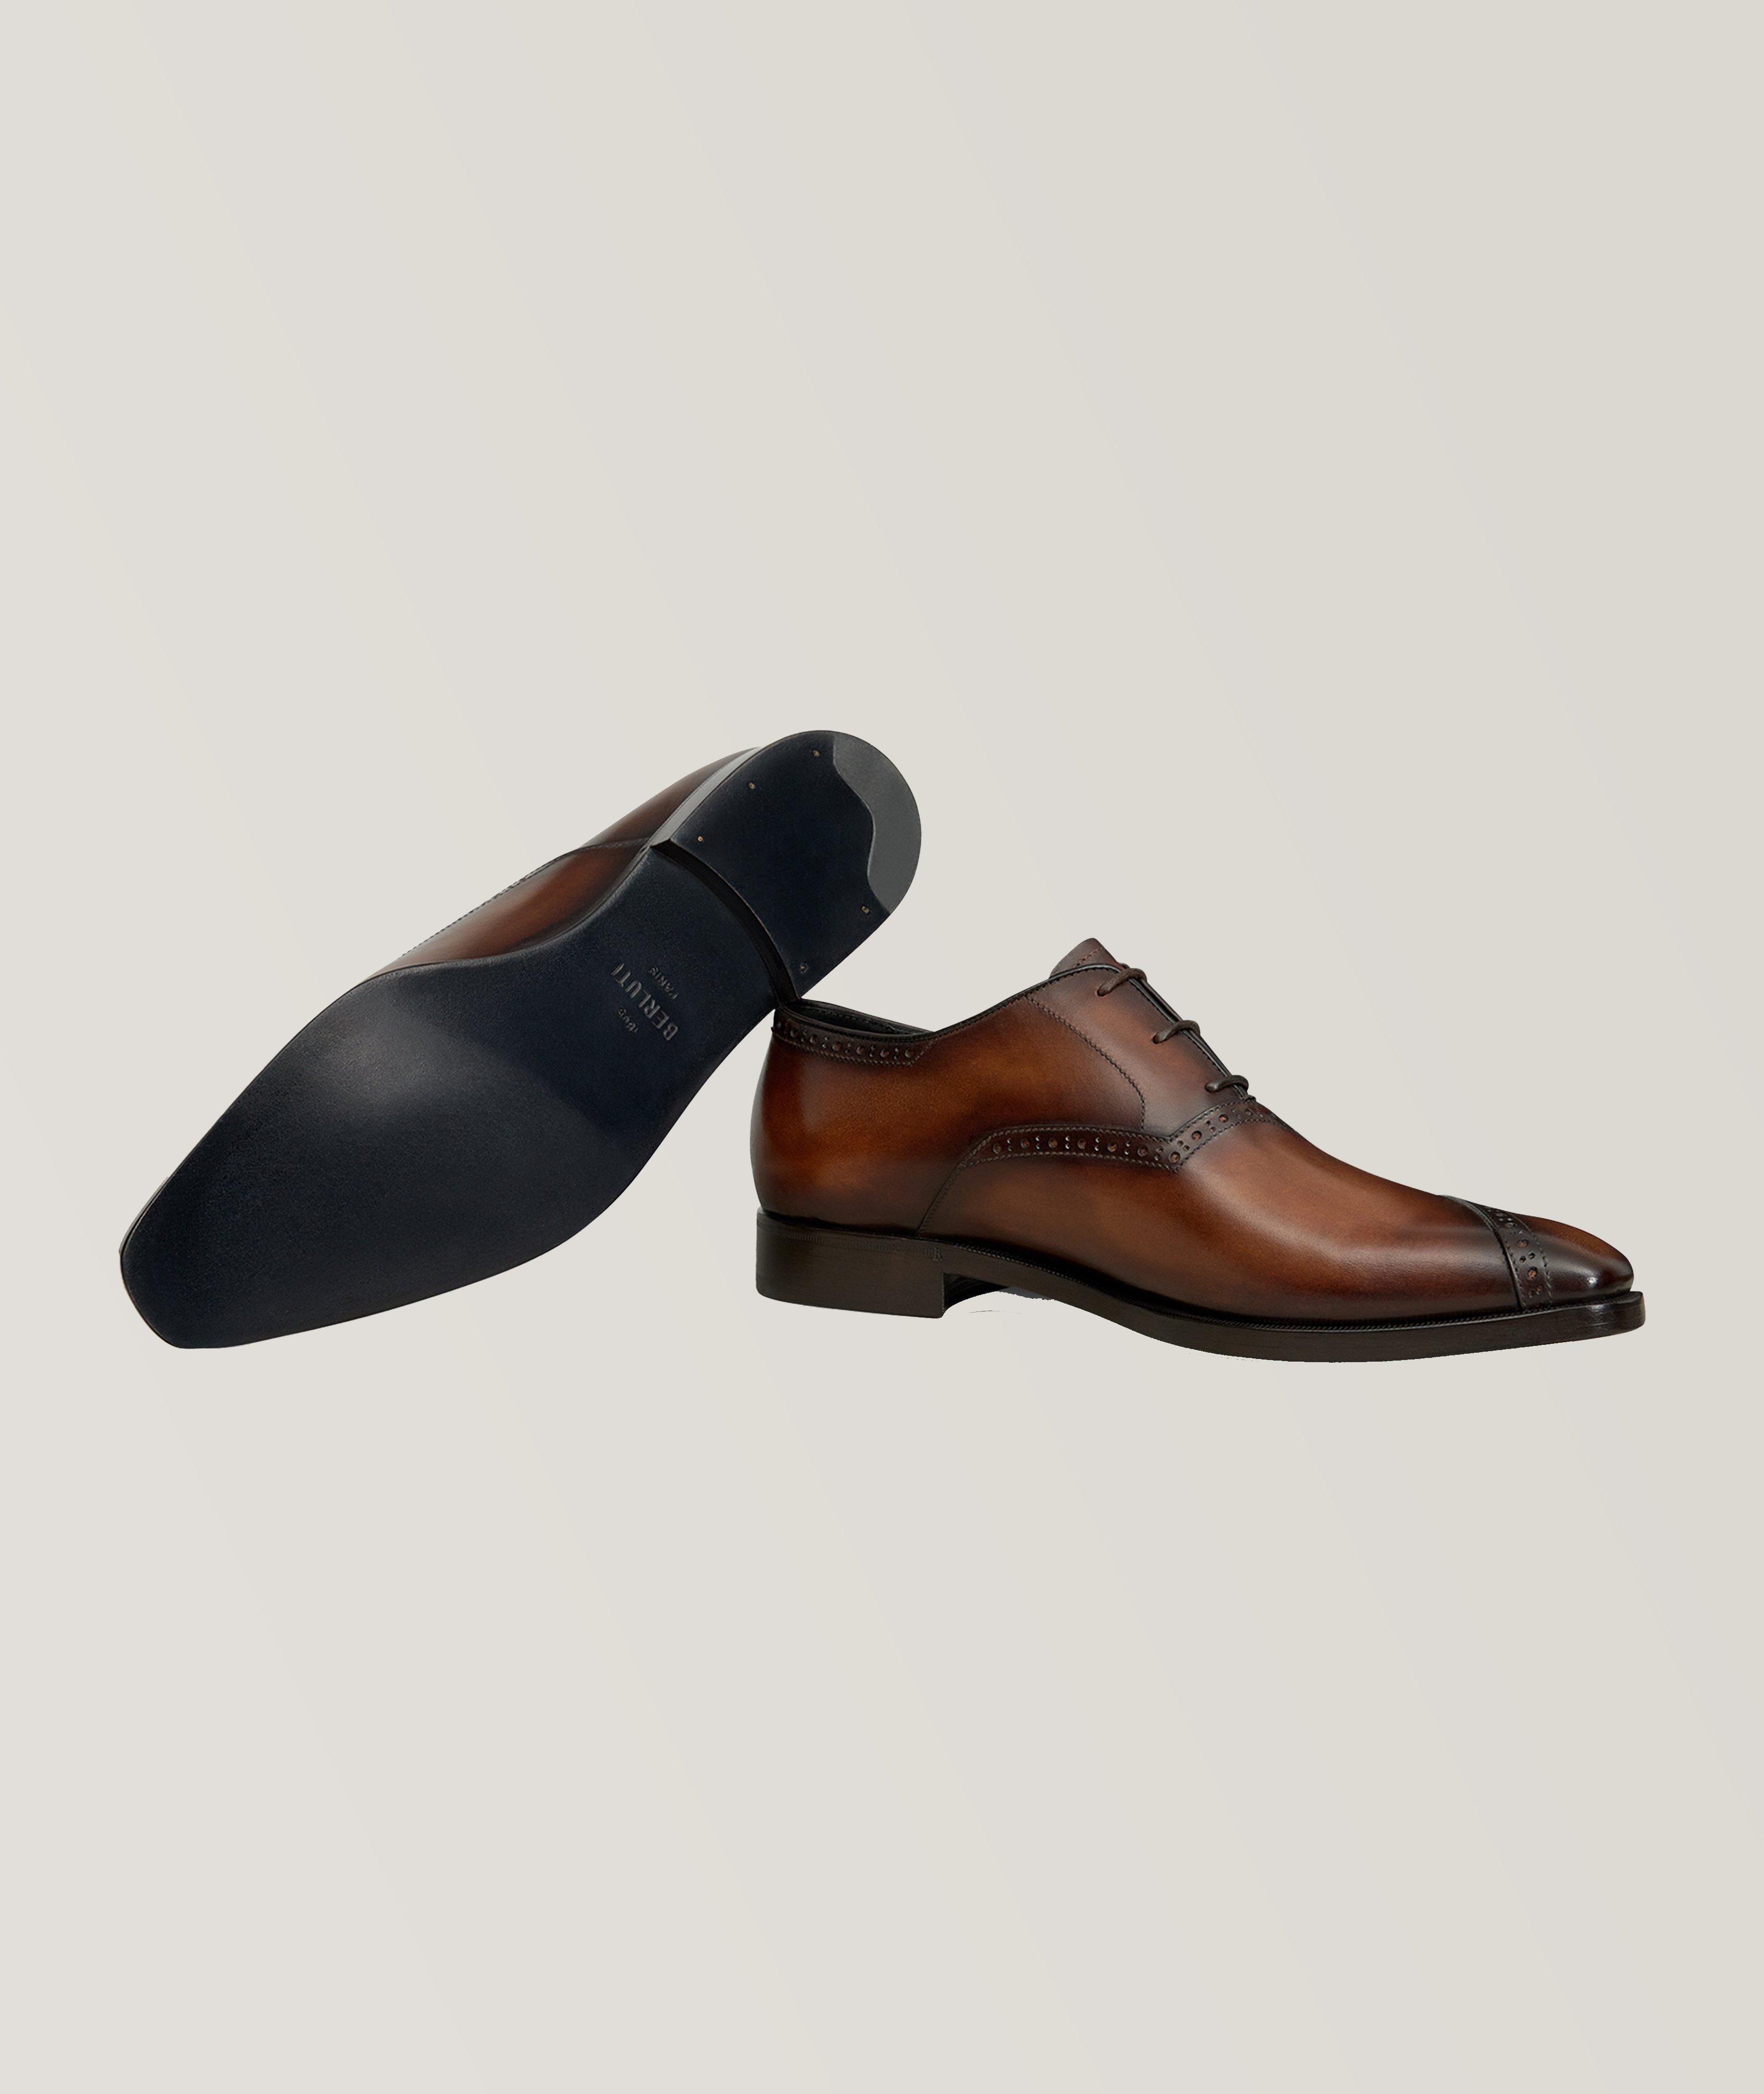 Asymmetric Broque Leather Oxford  image 3